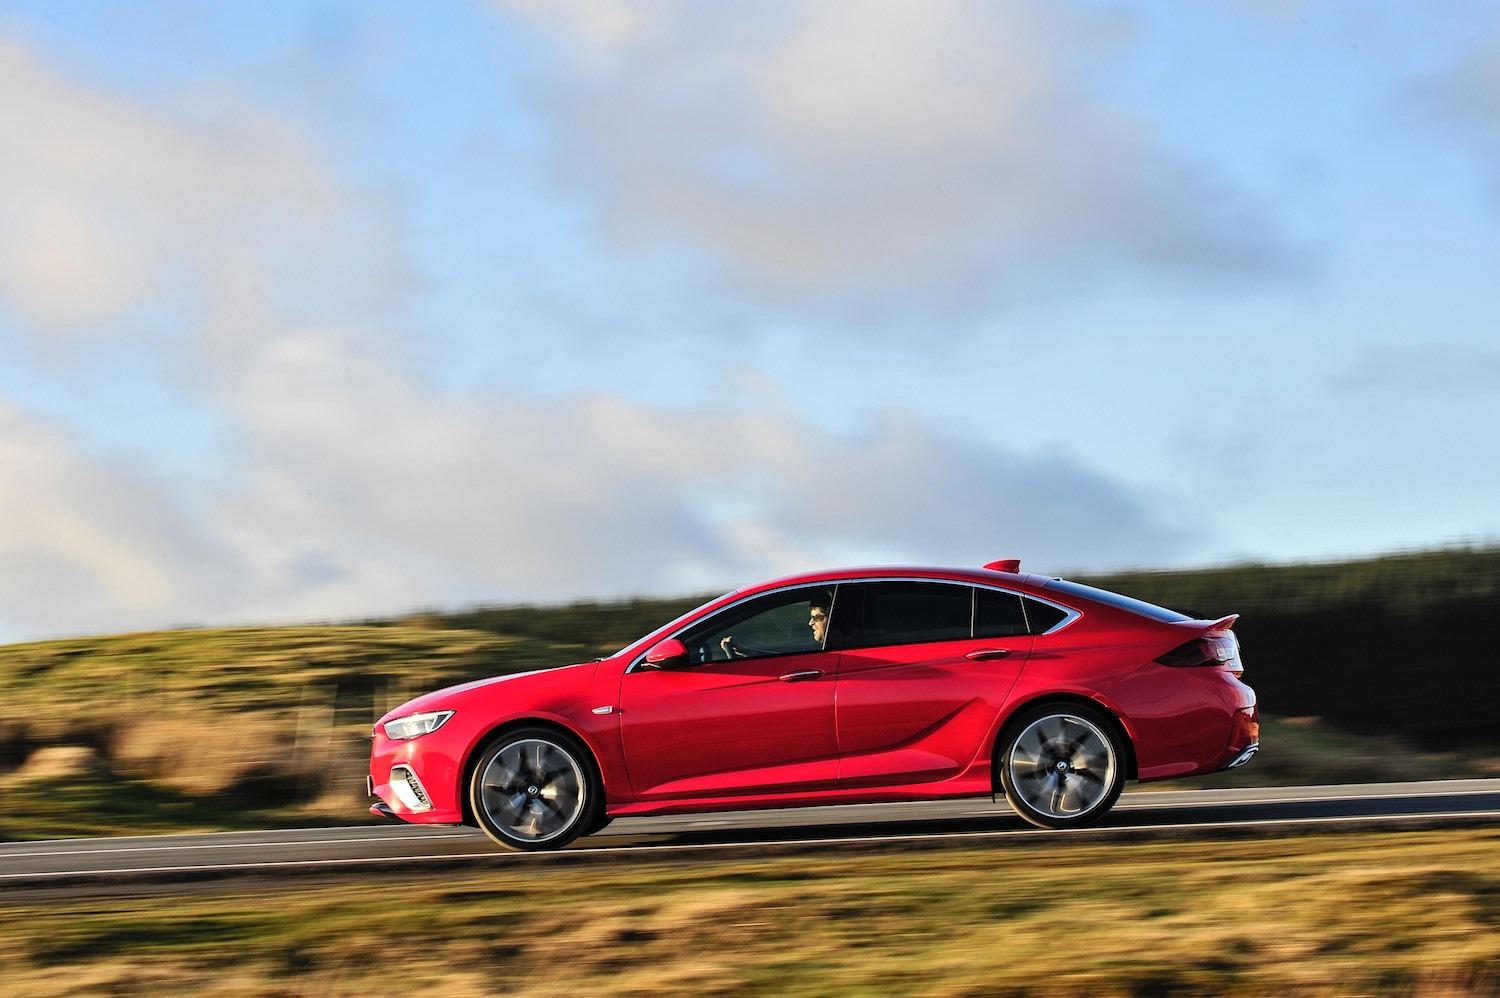 Tom Scanlan reviews the New Vauxhall Insignia GSi for Drive 10